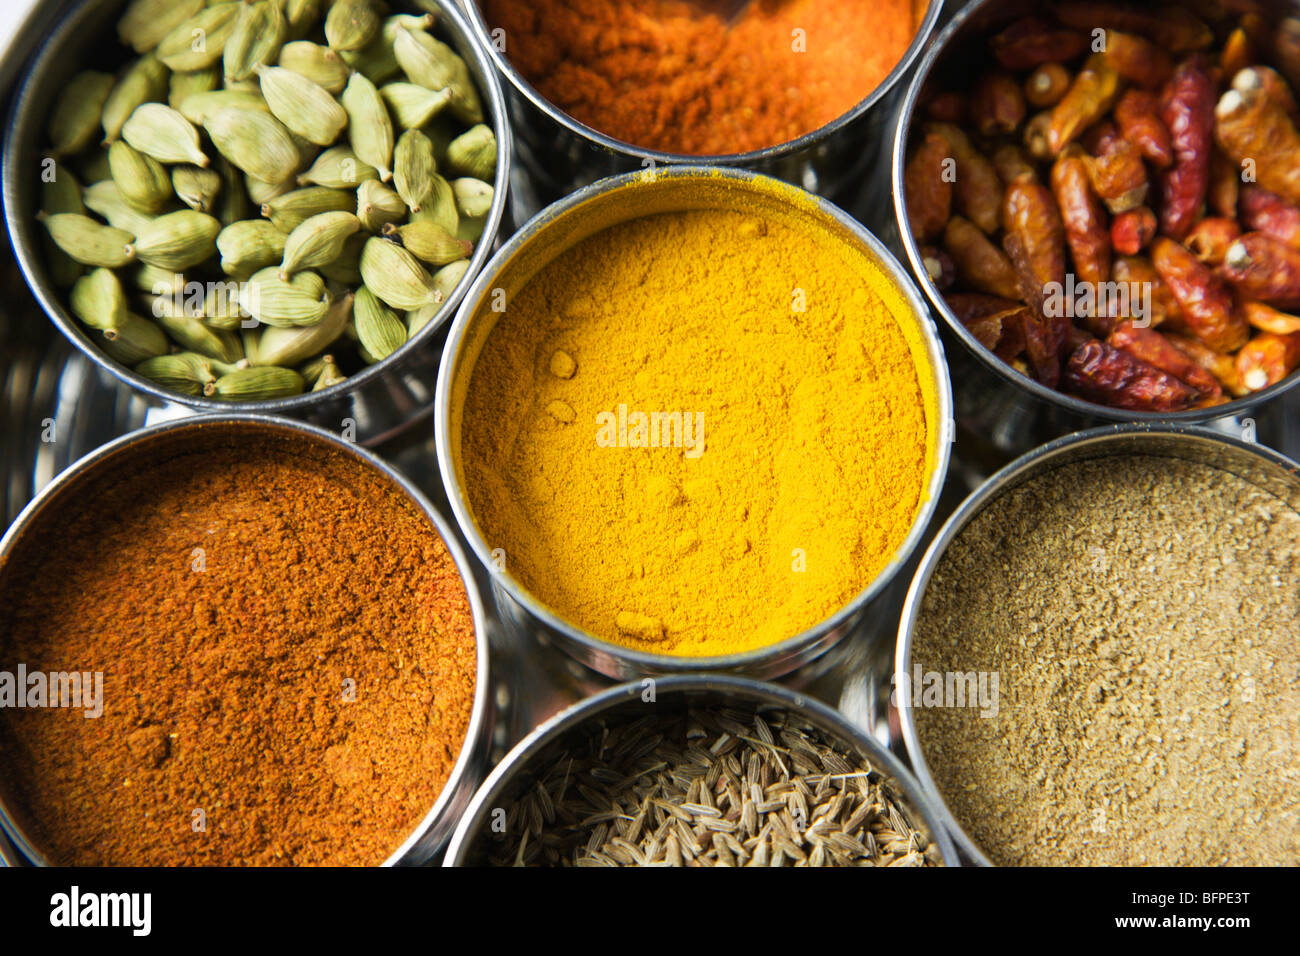 Masala Dabba with Spices Stock Photo